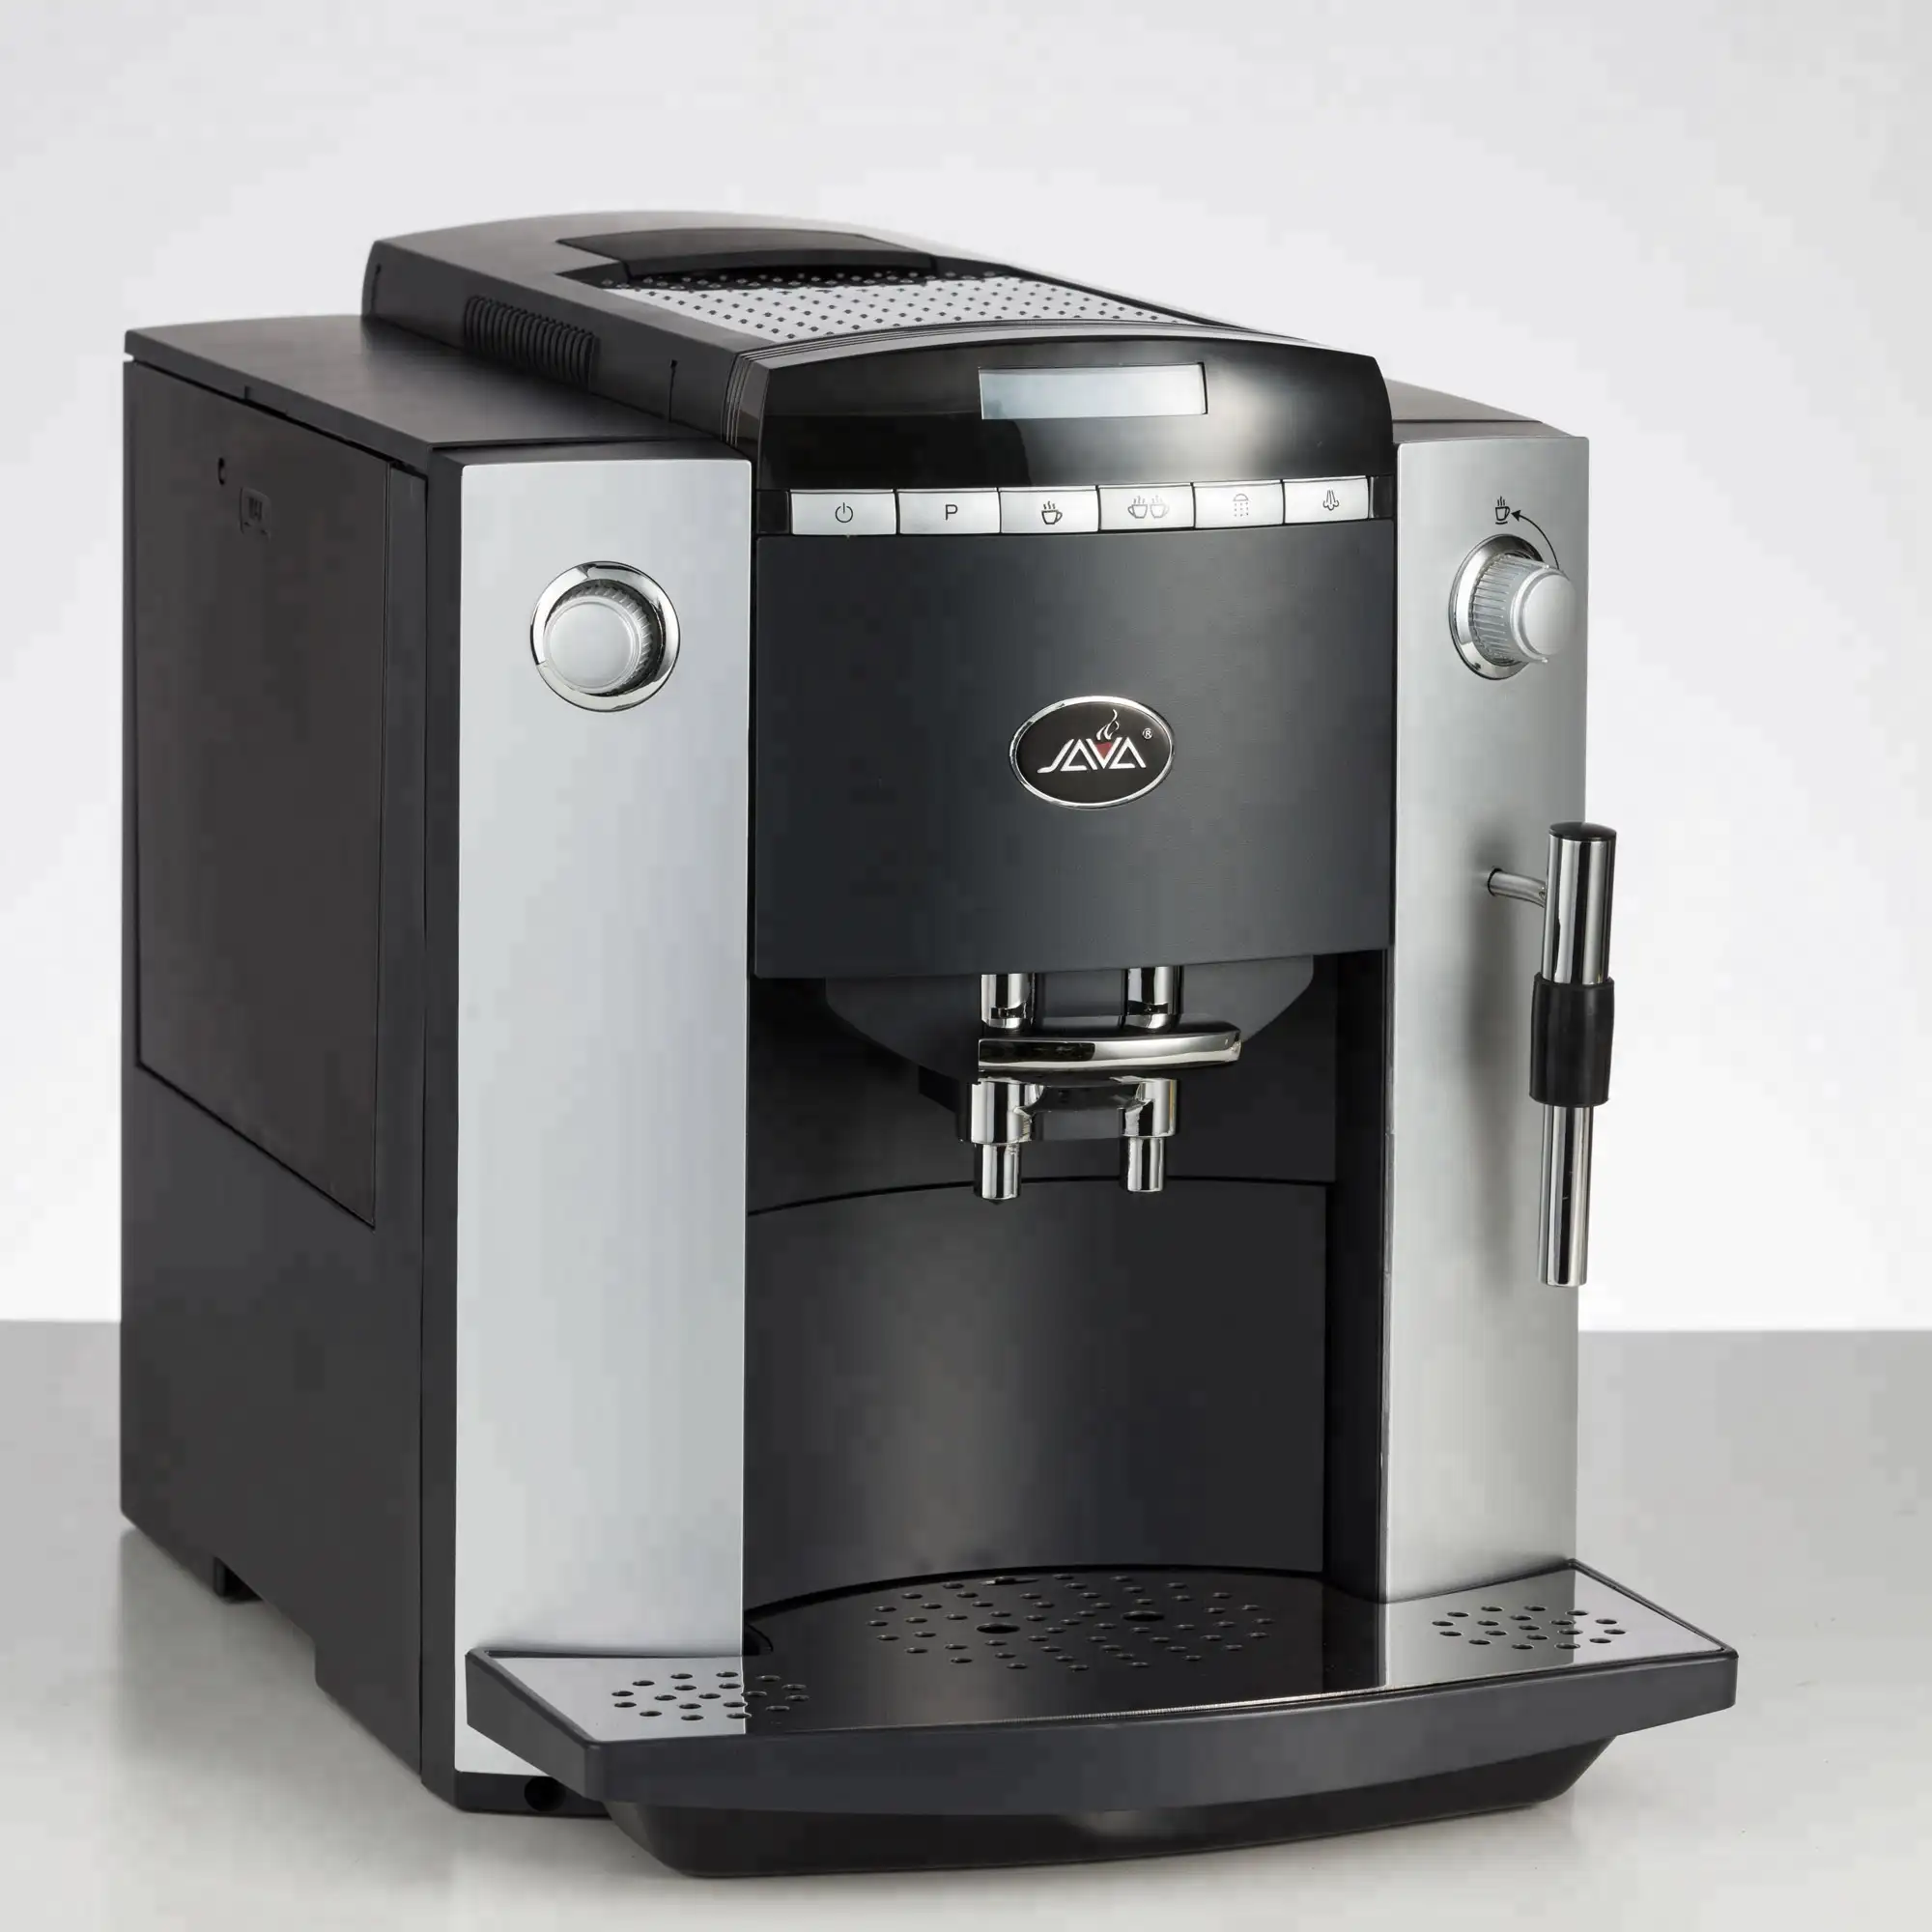 Easy To Use Kitchen Equipment Fully Automatic Coffee Machine Jura Looking